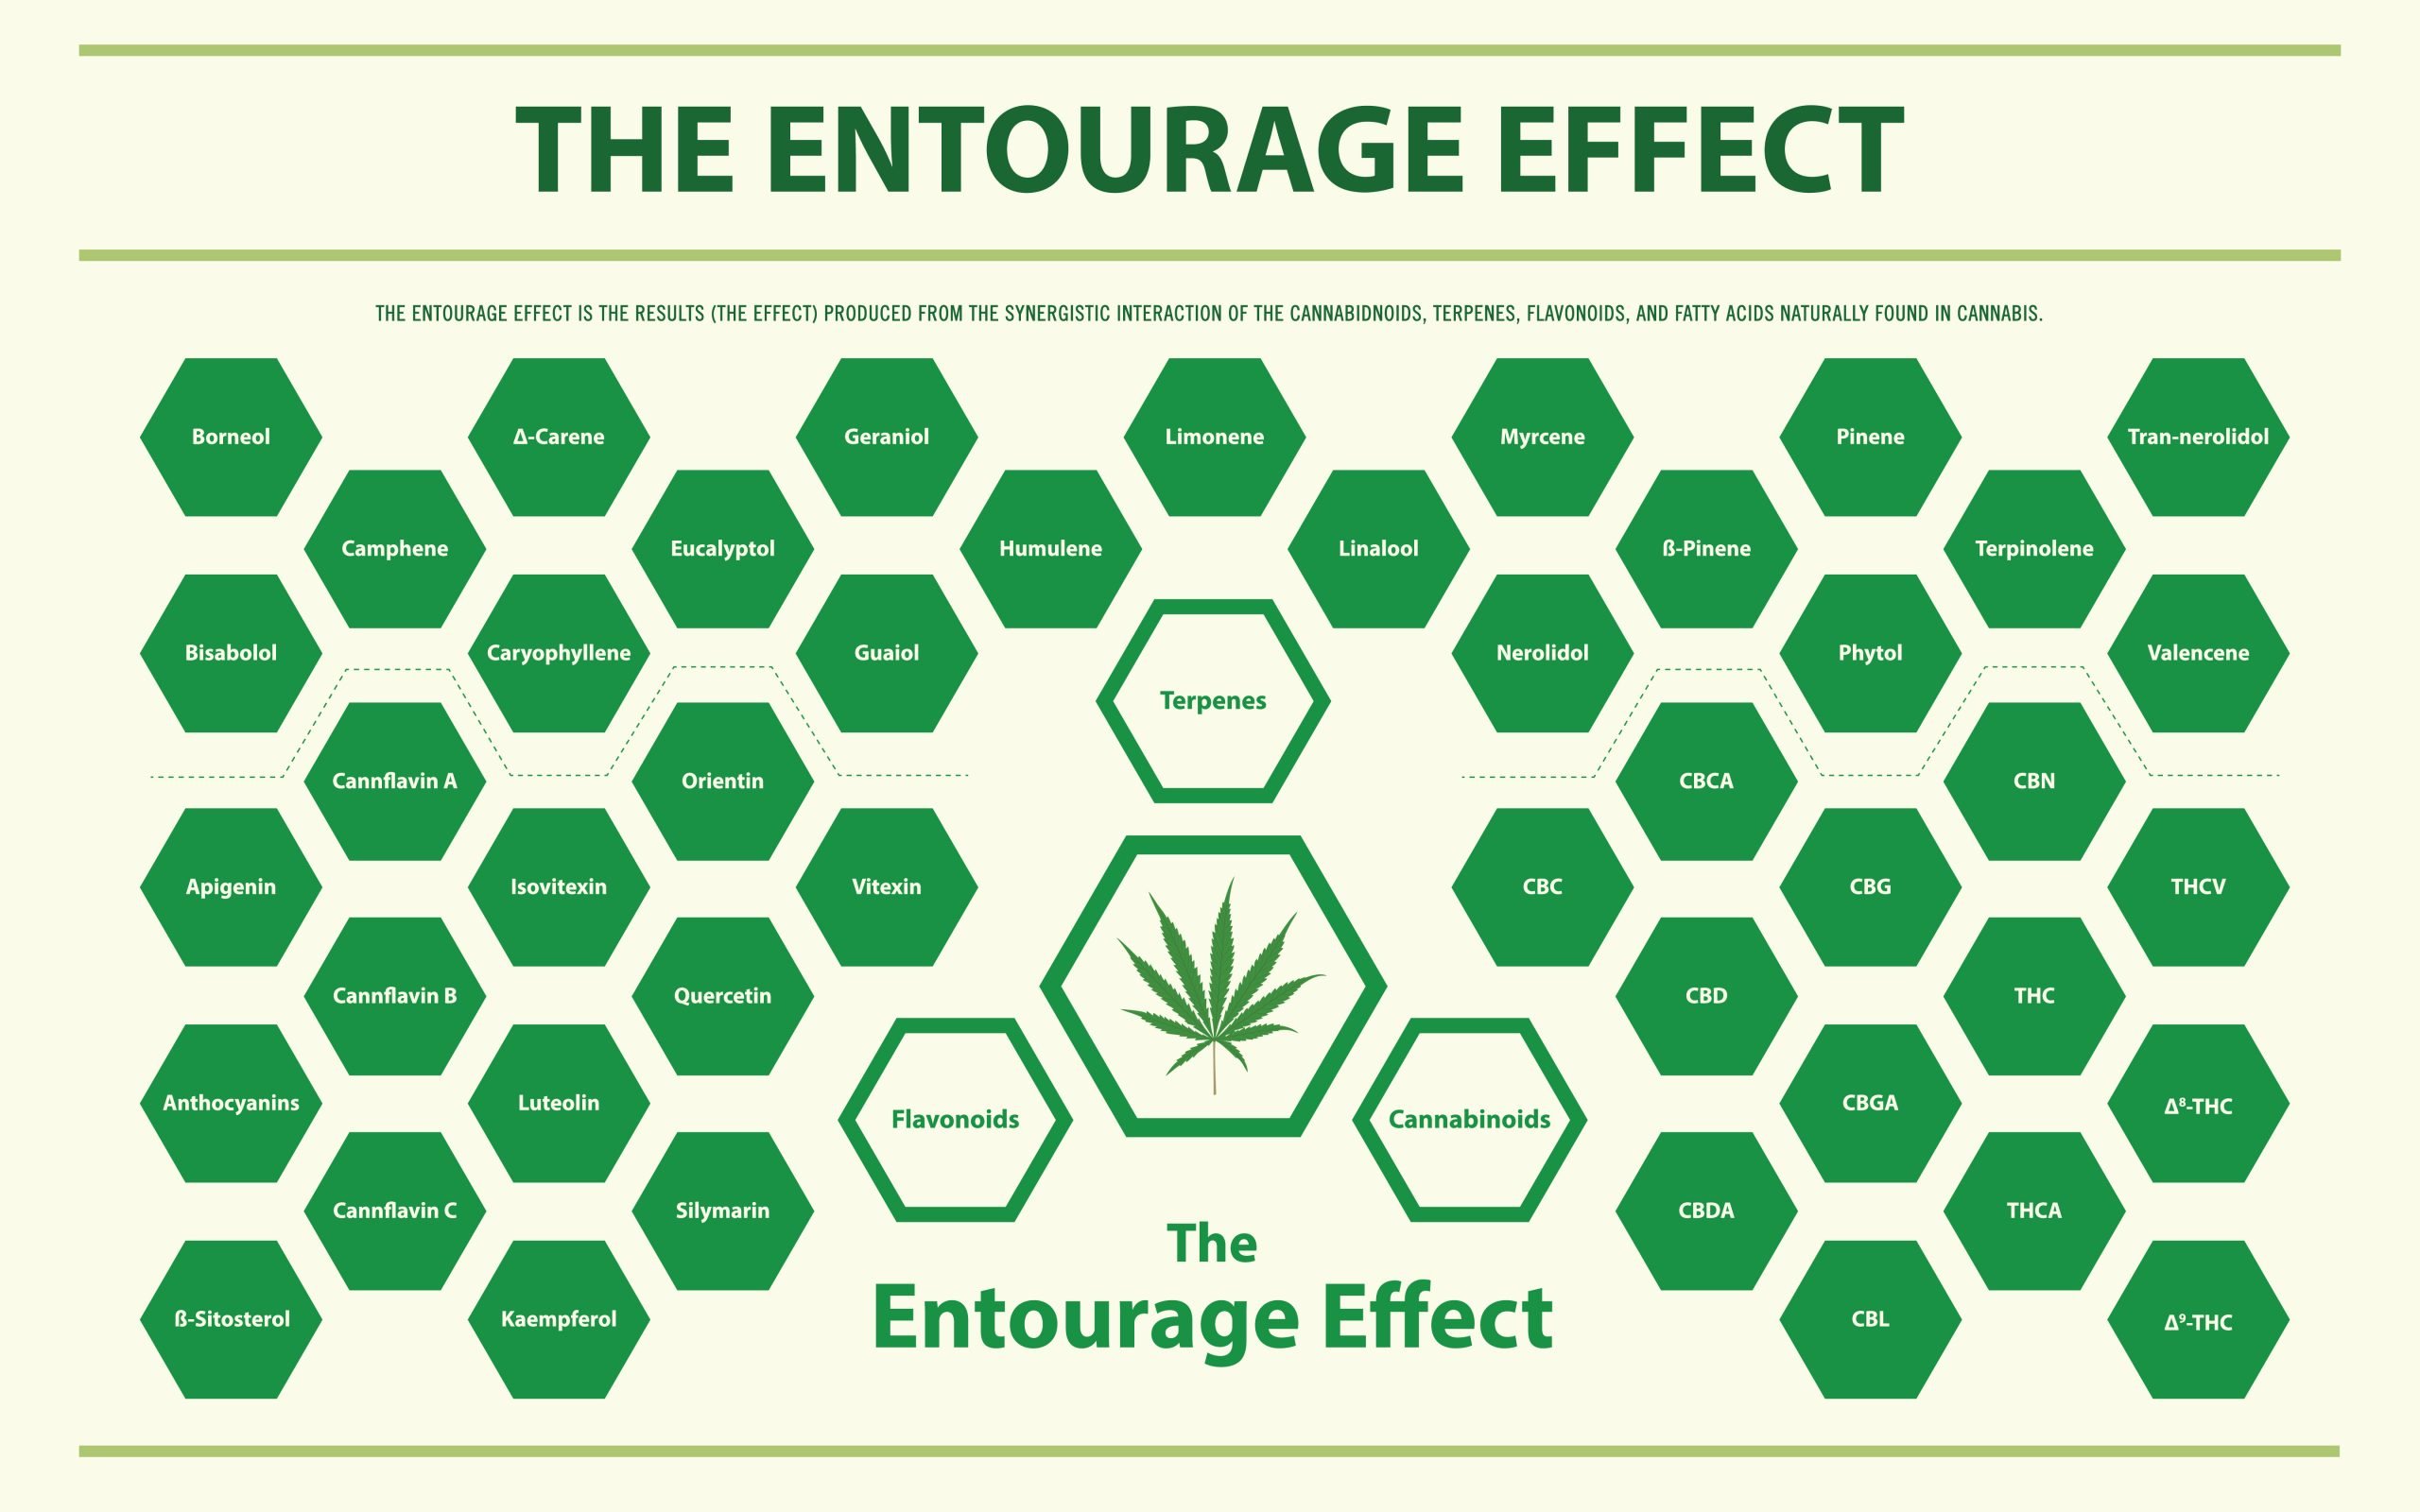 The,Entourage,Effect,Overview,Horizontal,Infographic,Illustration,About,Cannabis,As